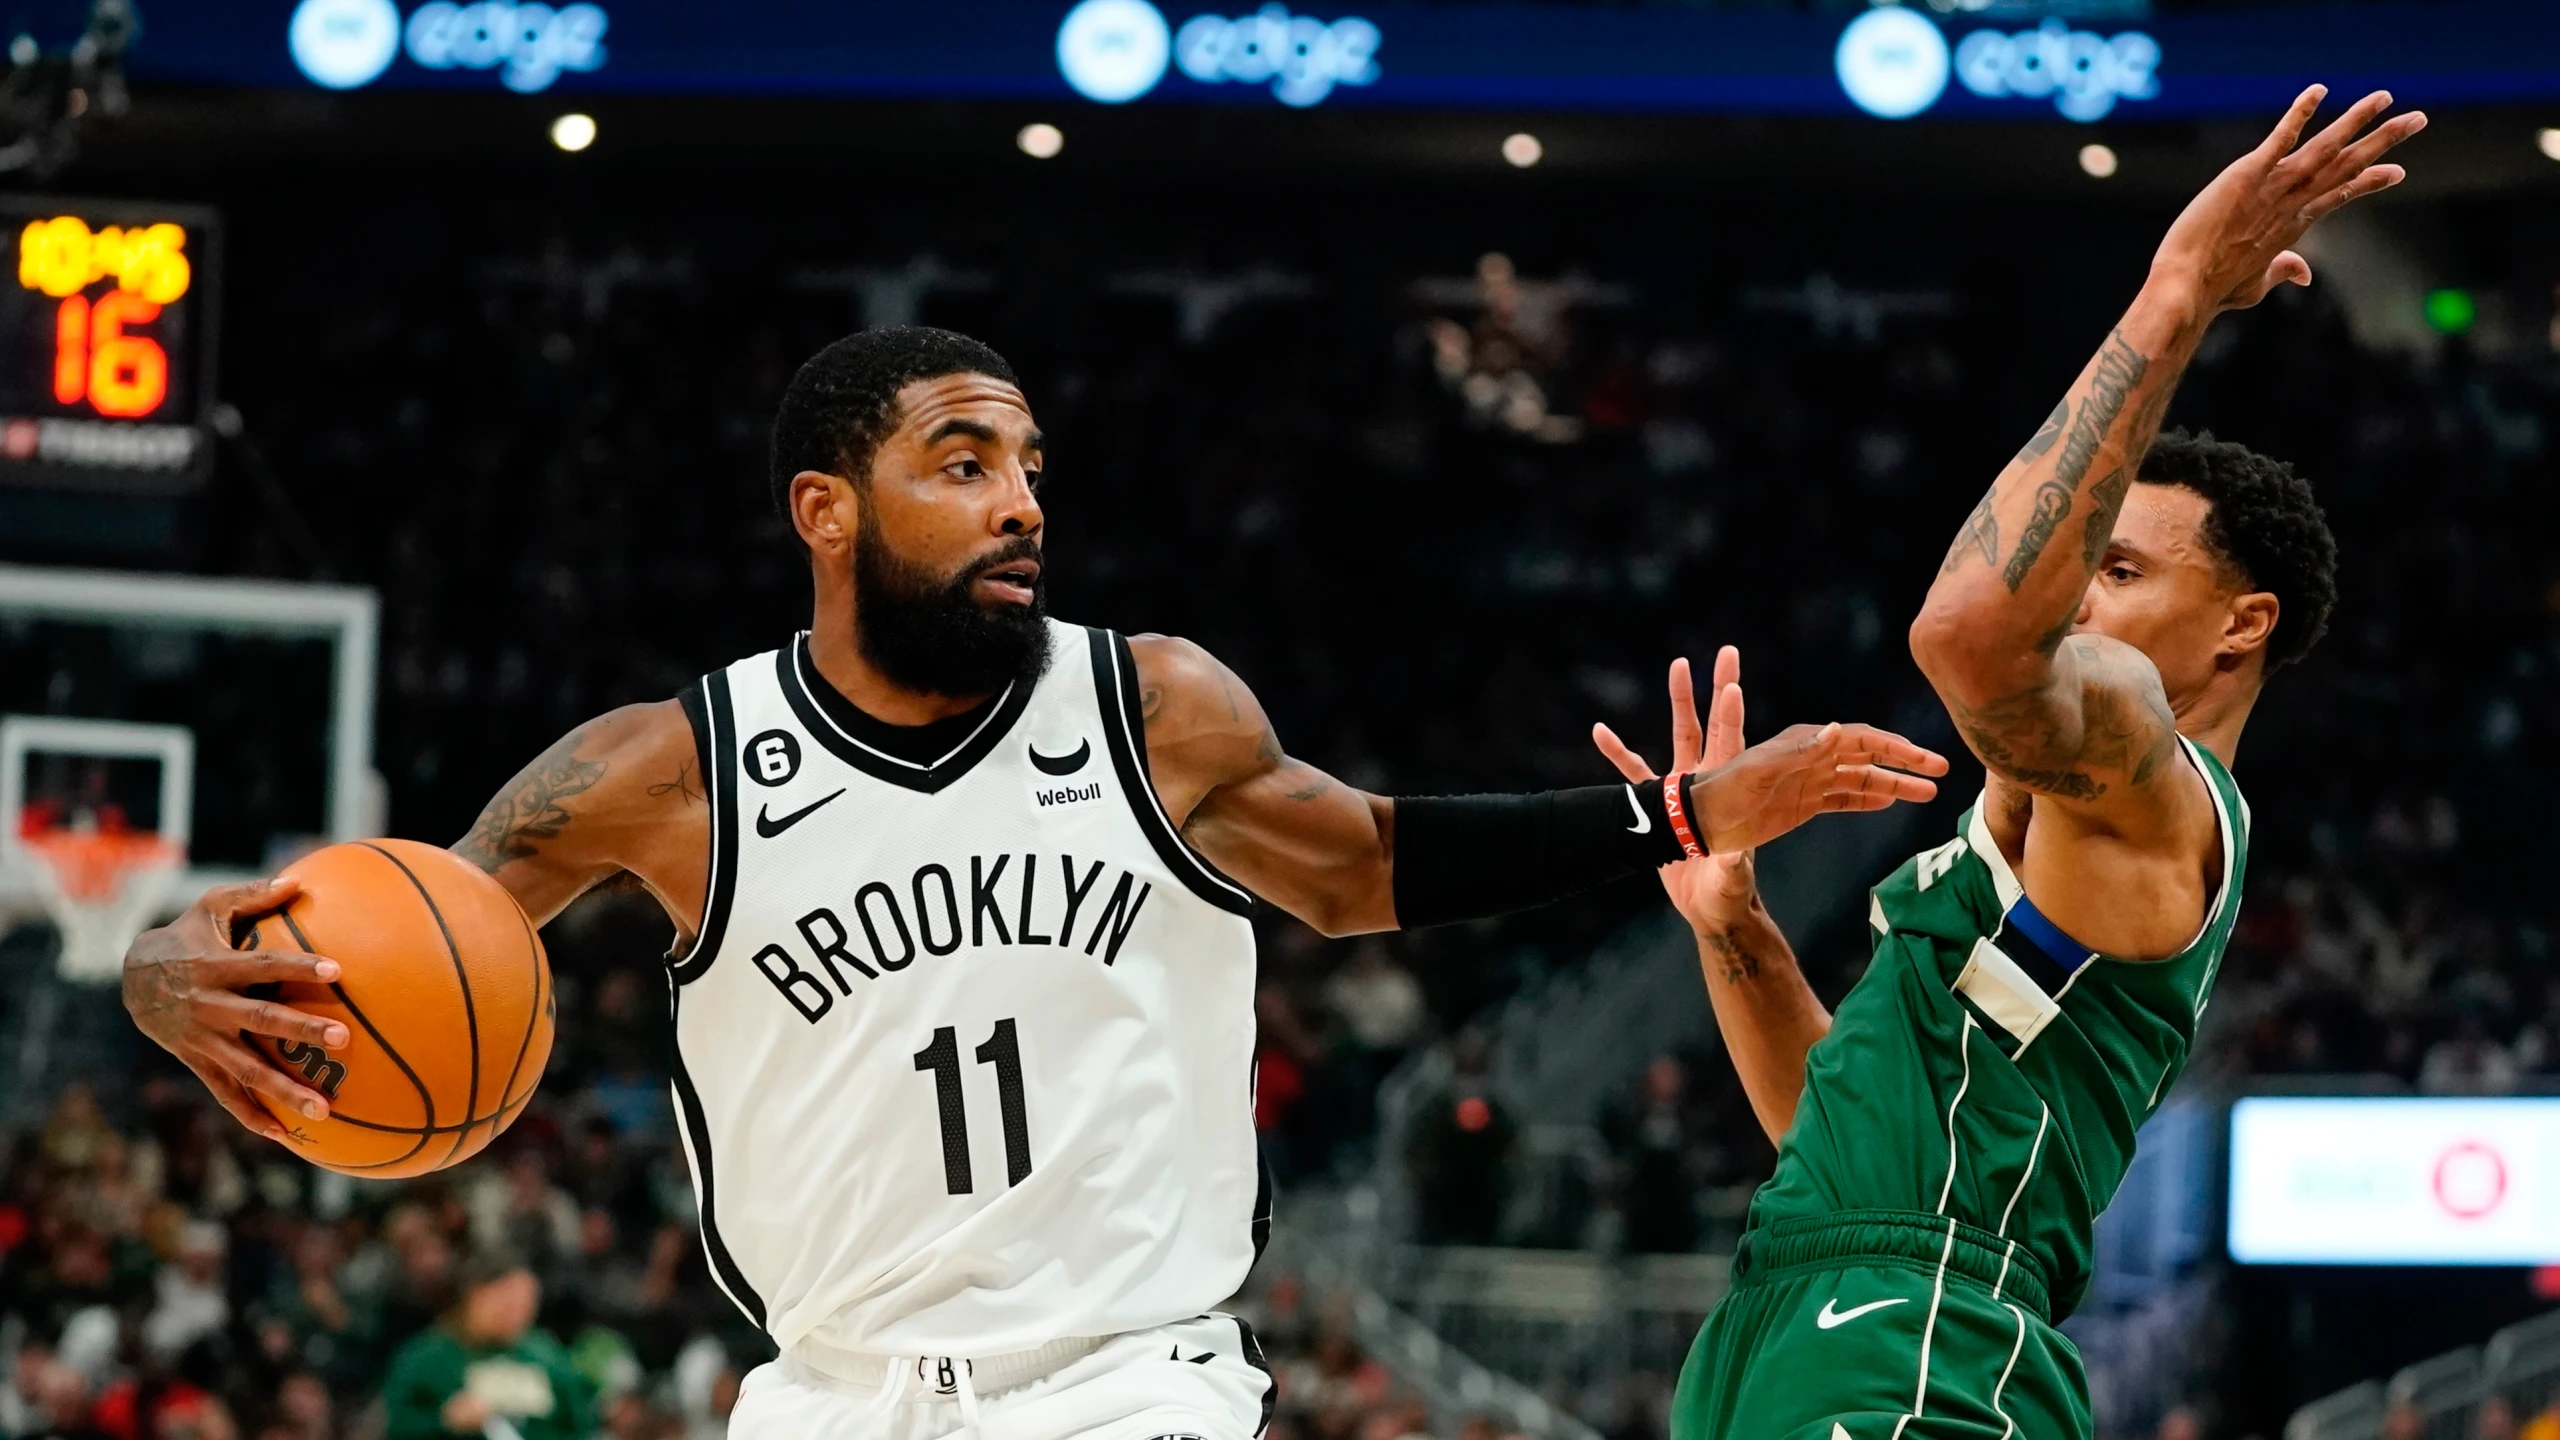 Bronx basketball coach breaks barriers following antisemitic comments from Kyrie Irving
